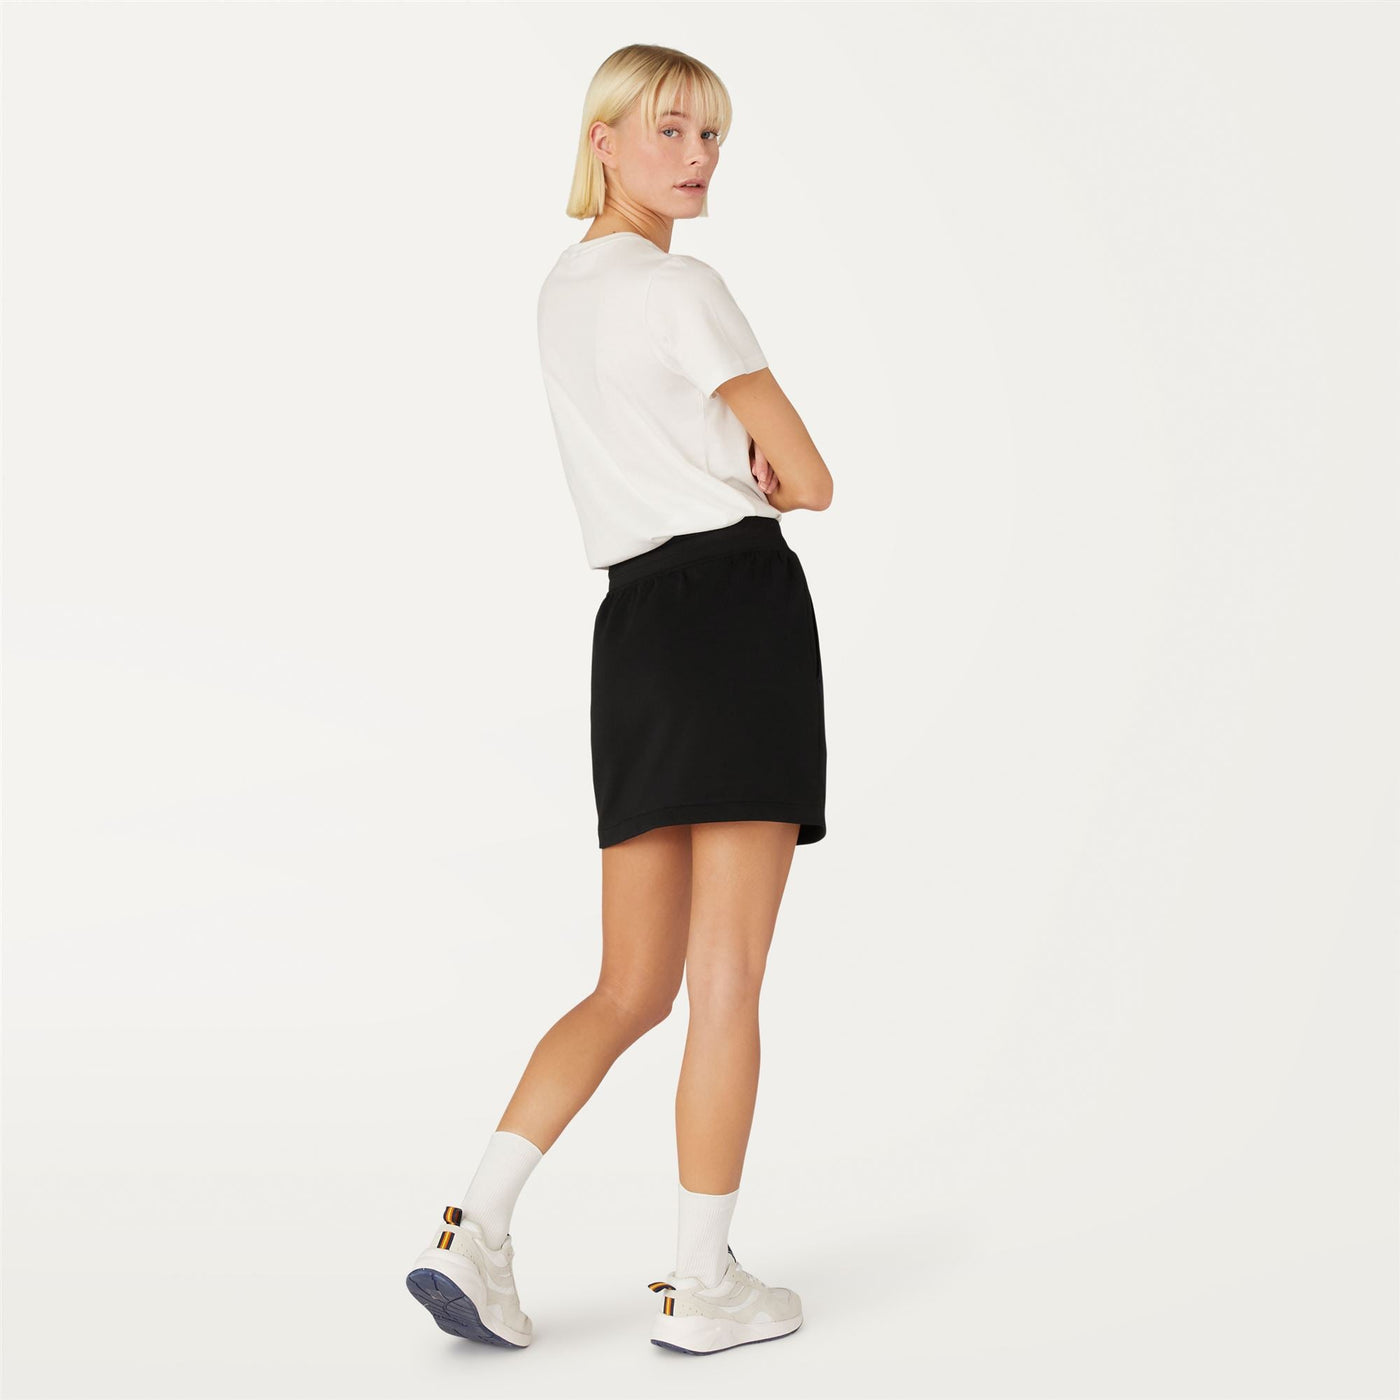 Skirts Woman JOSETTE LIGHT SPACER Short Black Pure | K-Way Dressed Front Double		